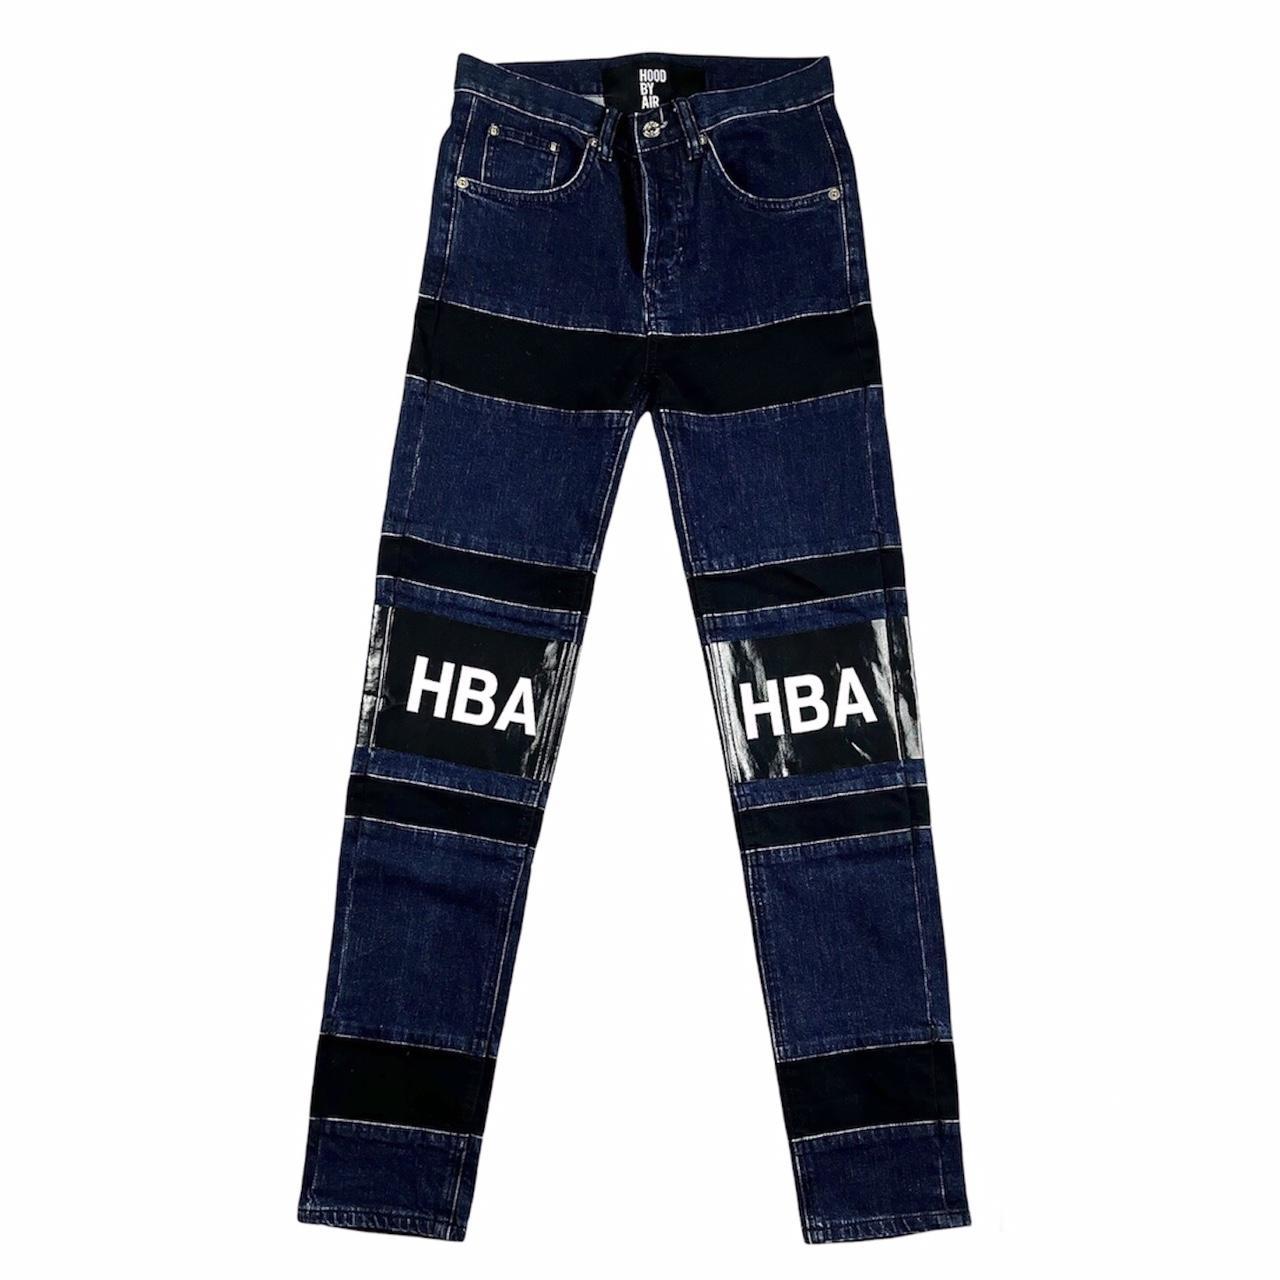 Hood By Air Men's Black and Blue Jeans